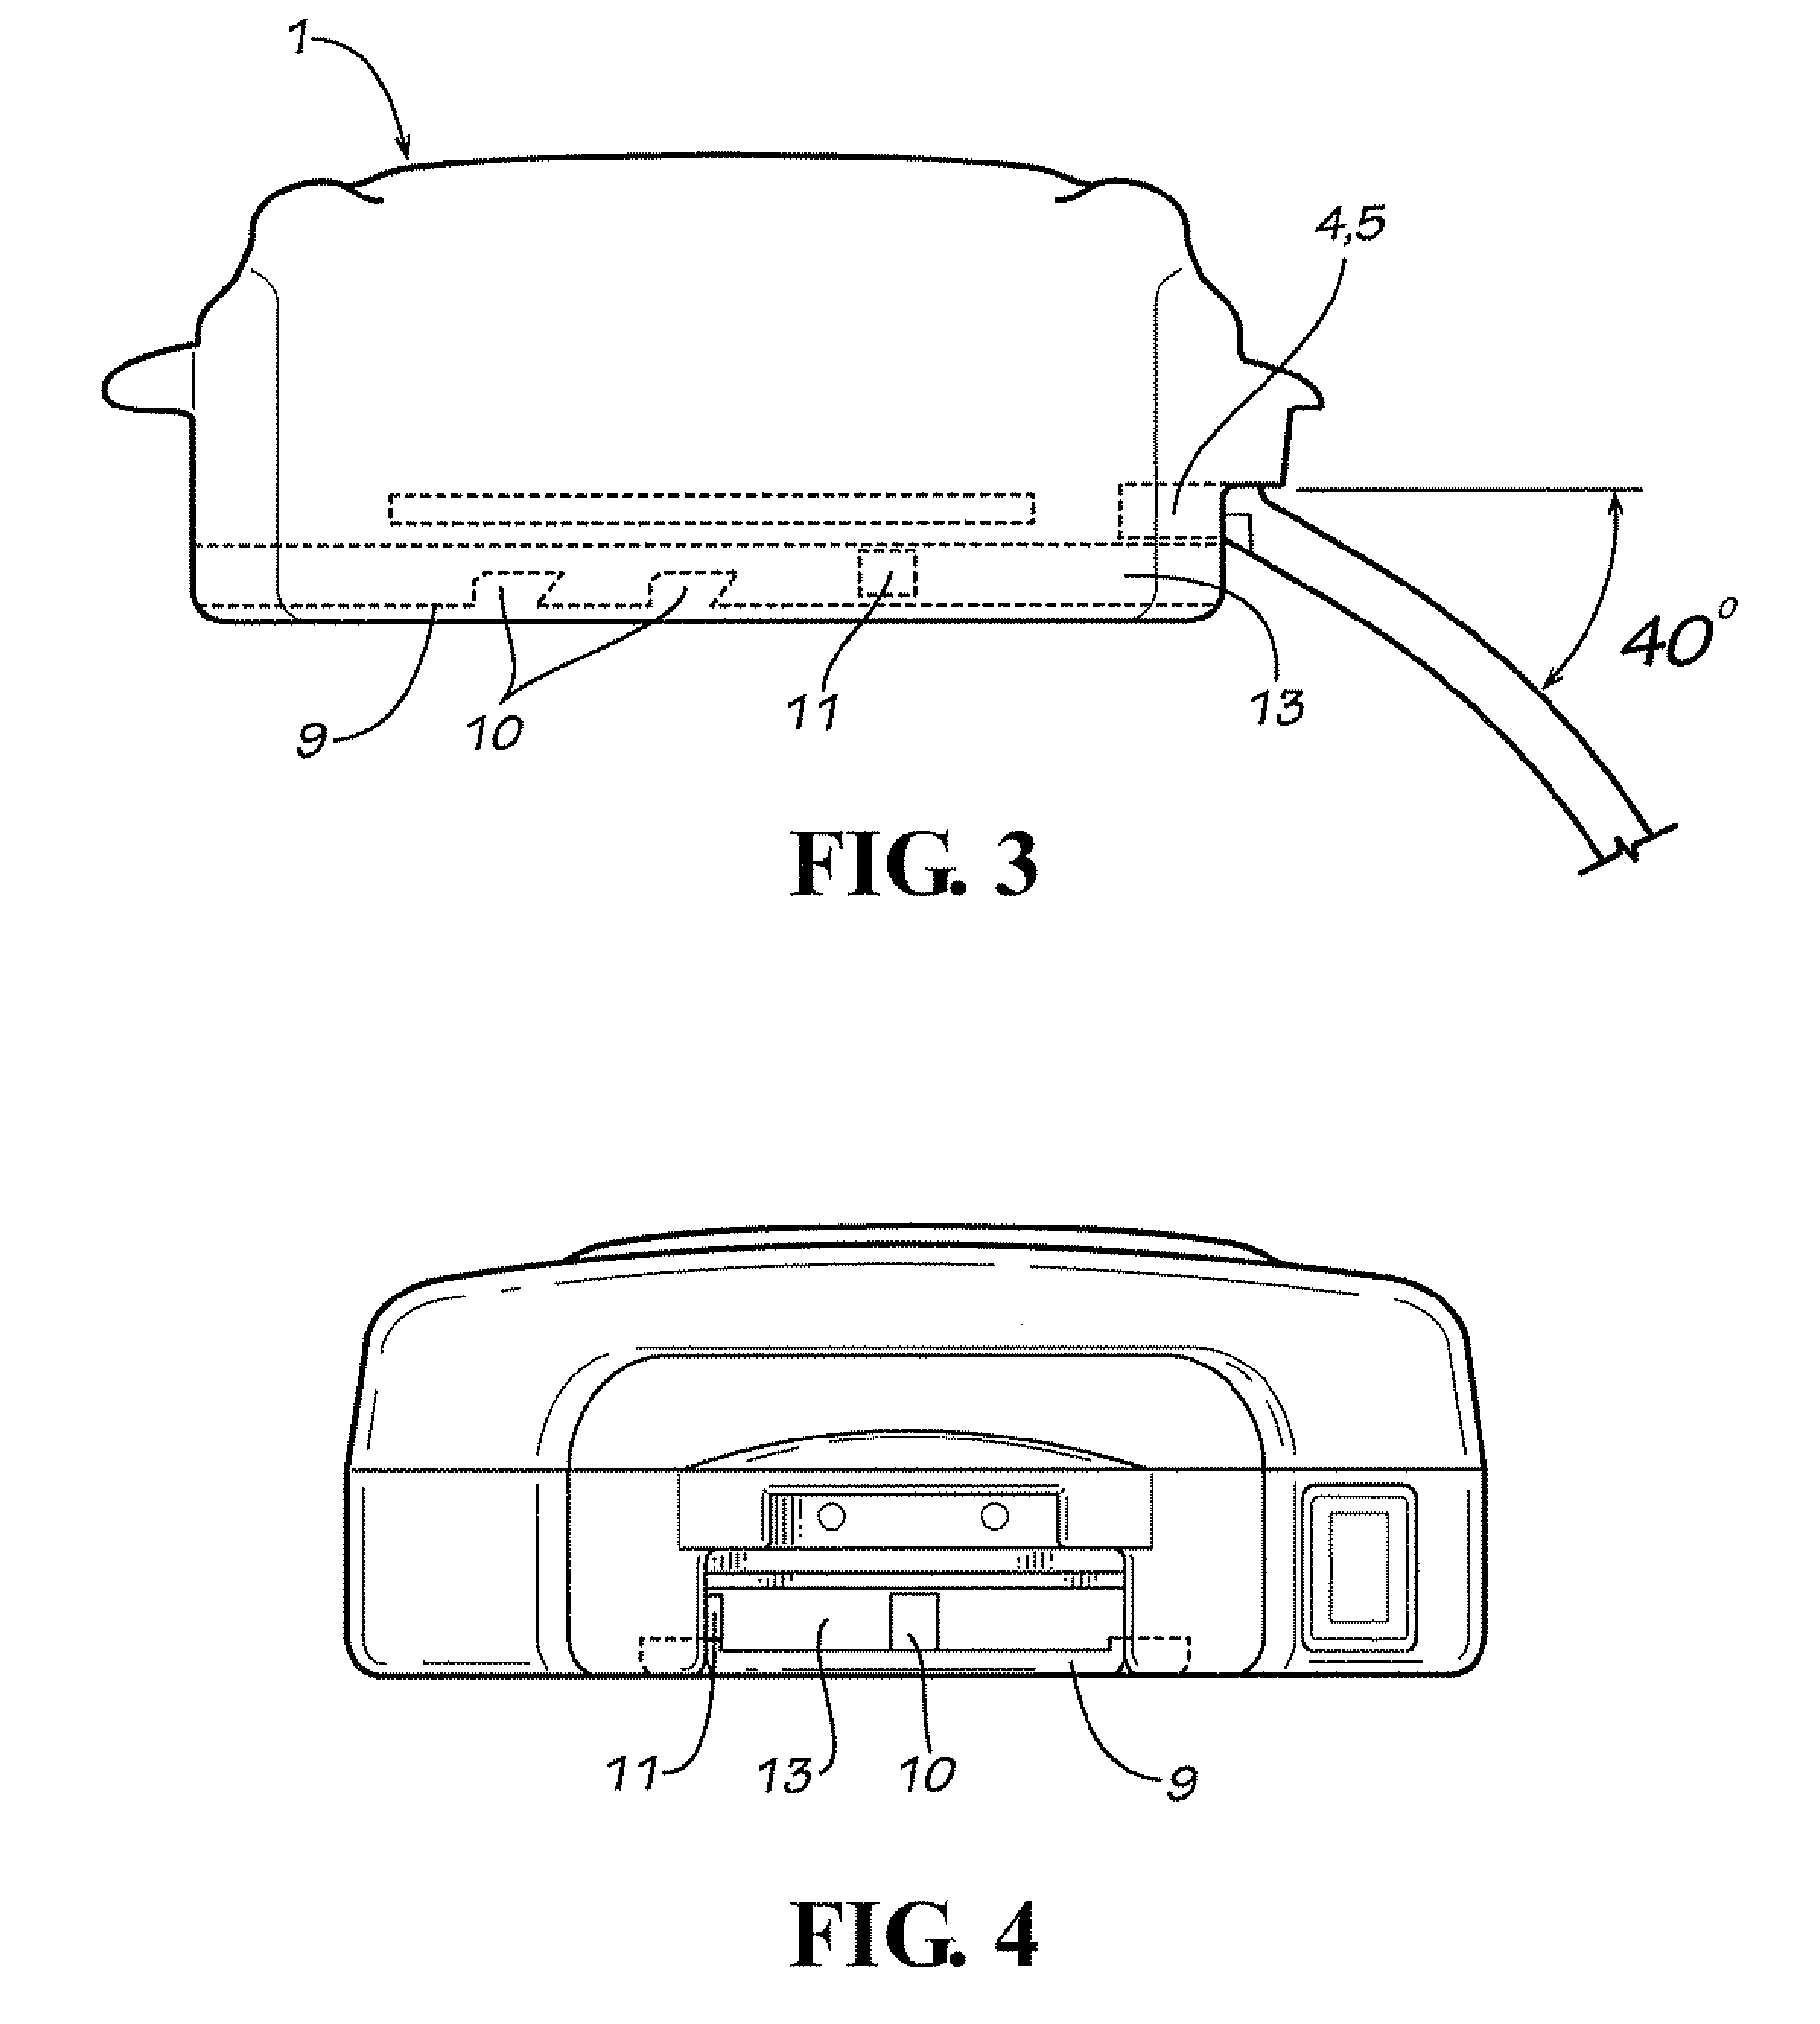 Tamper detection system for use with personal monitoring devices